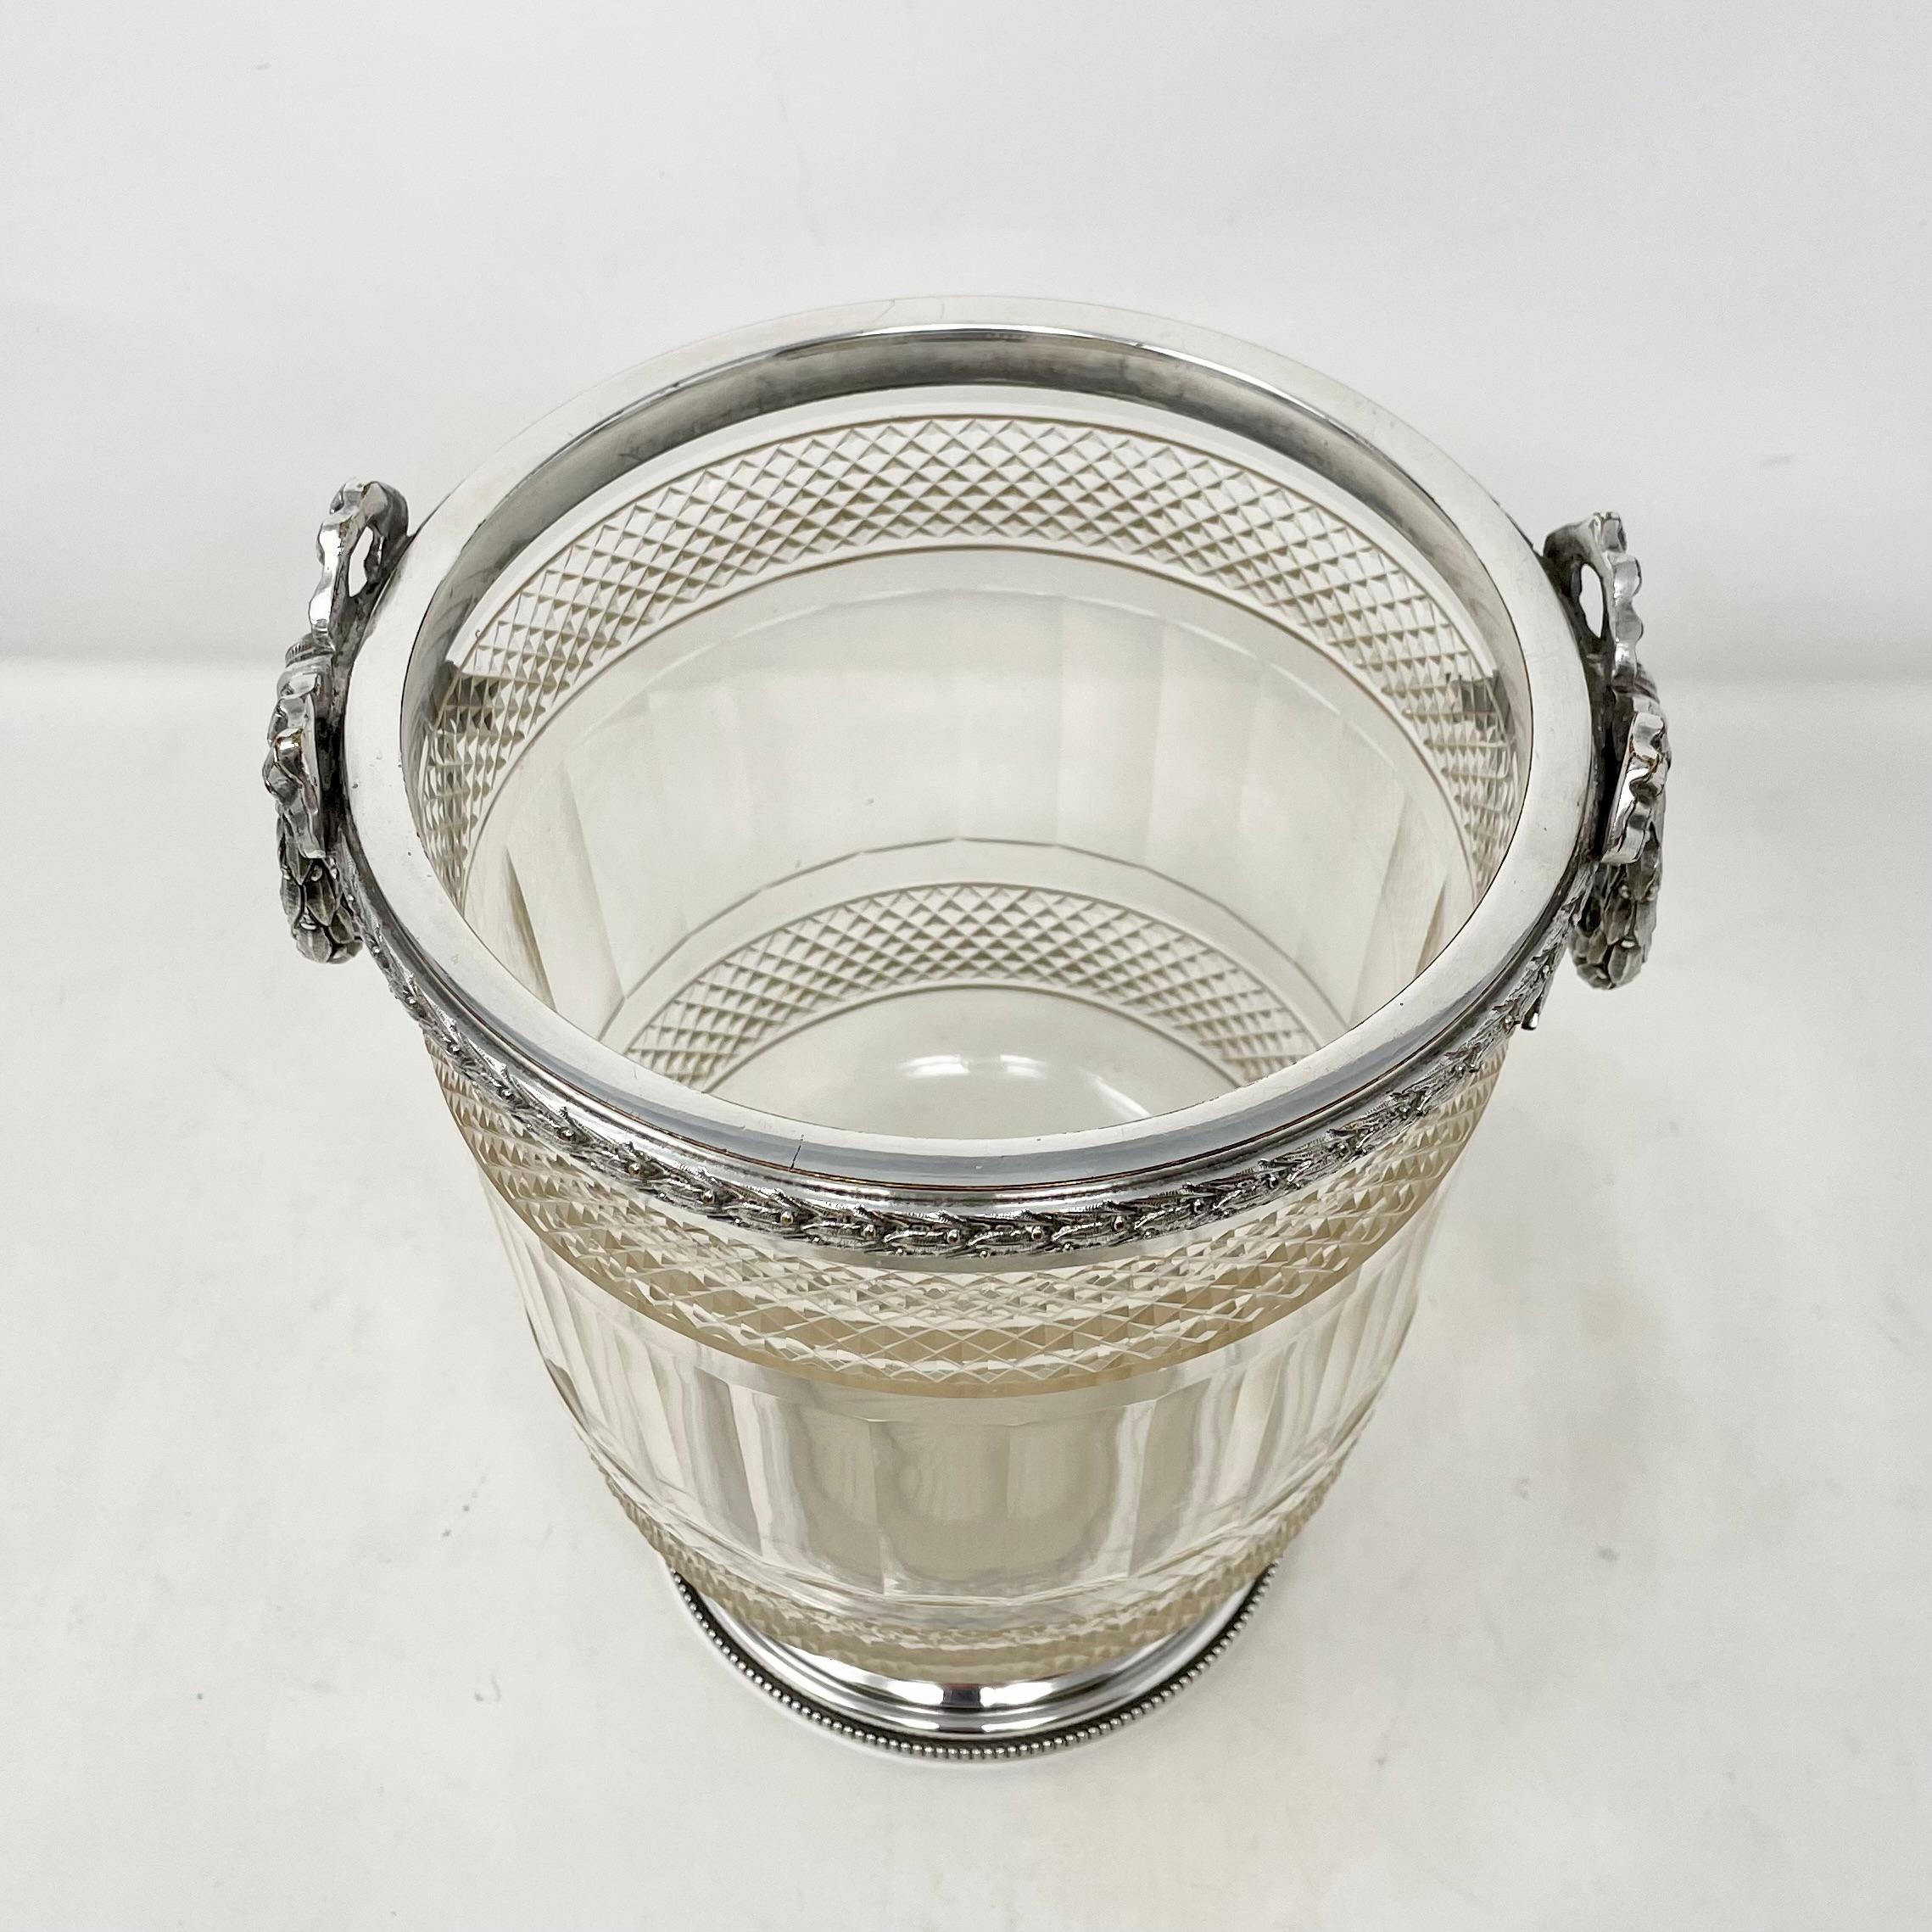 Antique French Louis XVI neo-classical cut crystal & silvered bronze champagne bucket, circa 1890's.
A beautiful old wine cooler in pristine condition and substantial size.